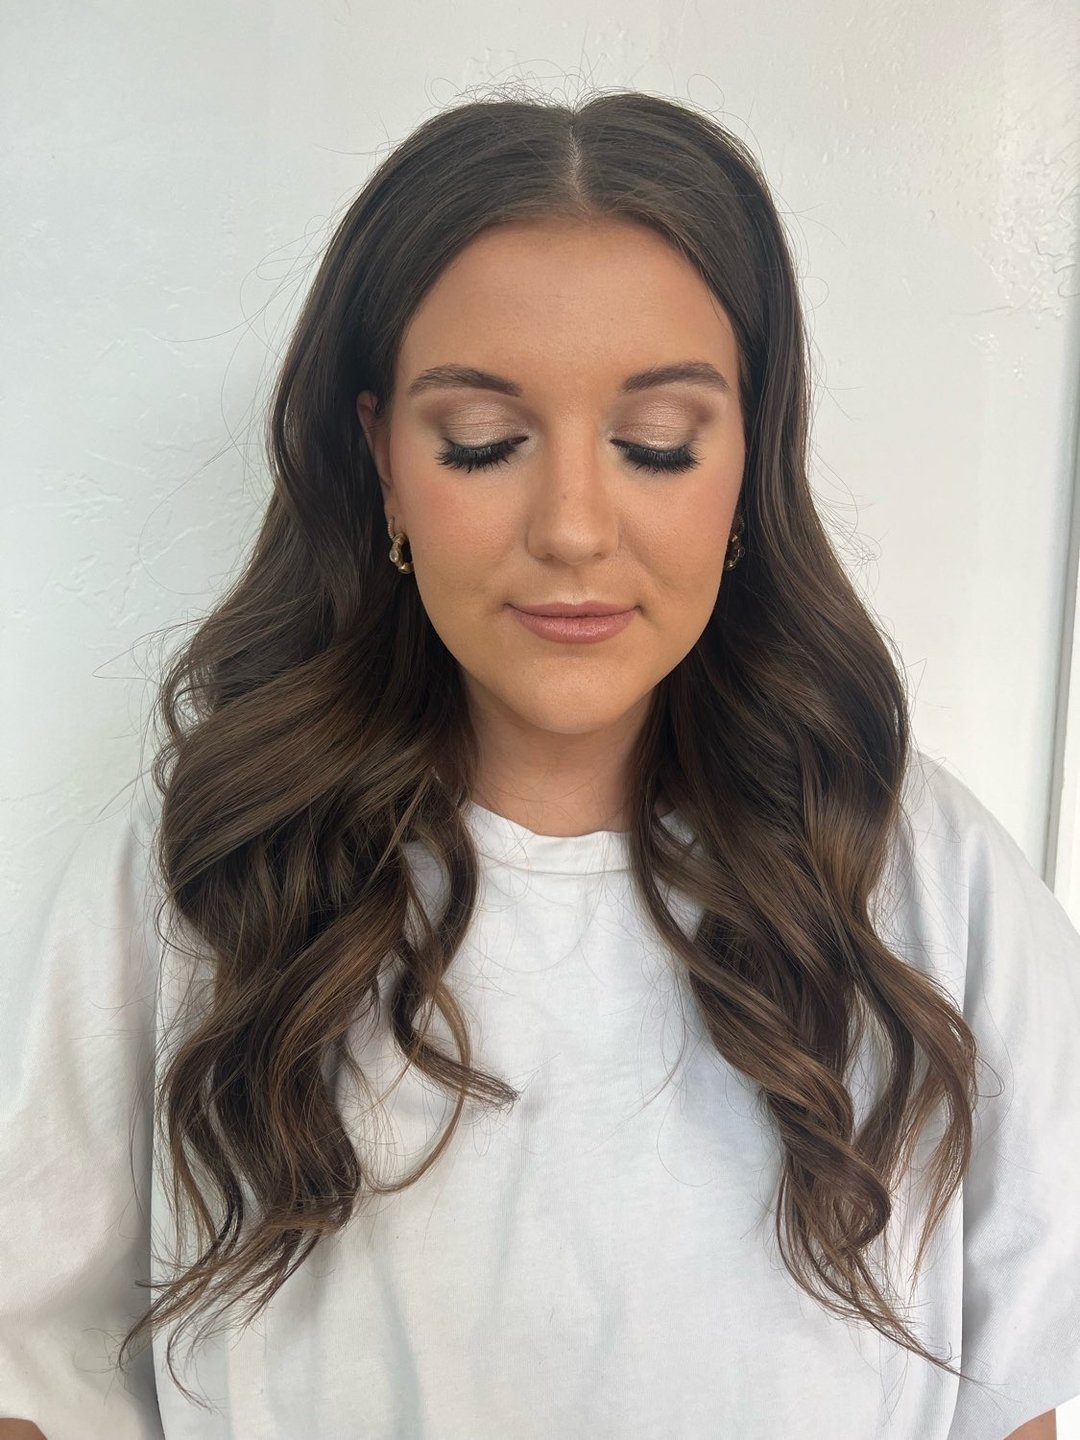 Brides, save this post to show your makeup artist soft glam inspo at your trial run 🤍 @taylorrayttp

Dallas Hairstylist. Dallas Makeup Artist. Bridal Makeup. Bridal Hair. Texas Brides. 2024 Bride. 2025 Bride. Oklahoma Bride. Soft Glam. Wedding Makeu